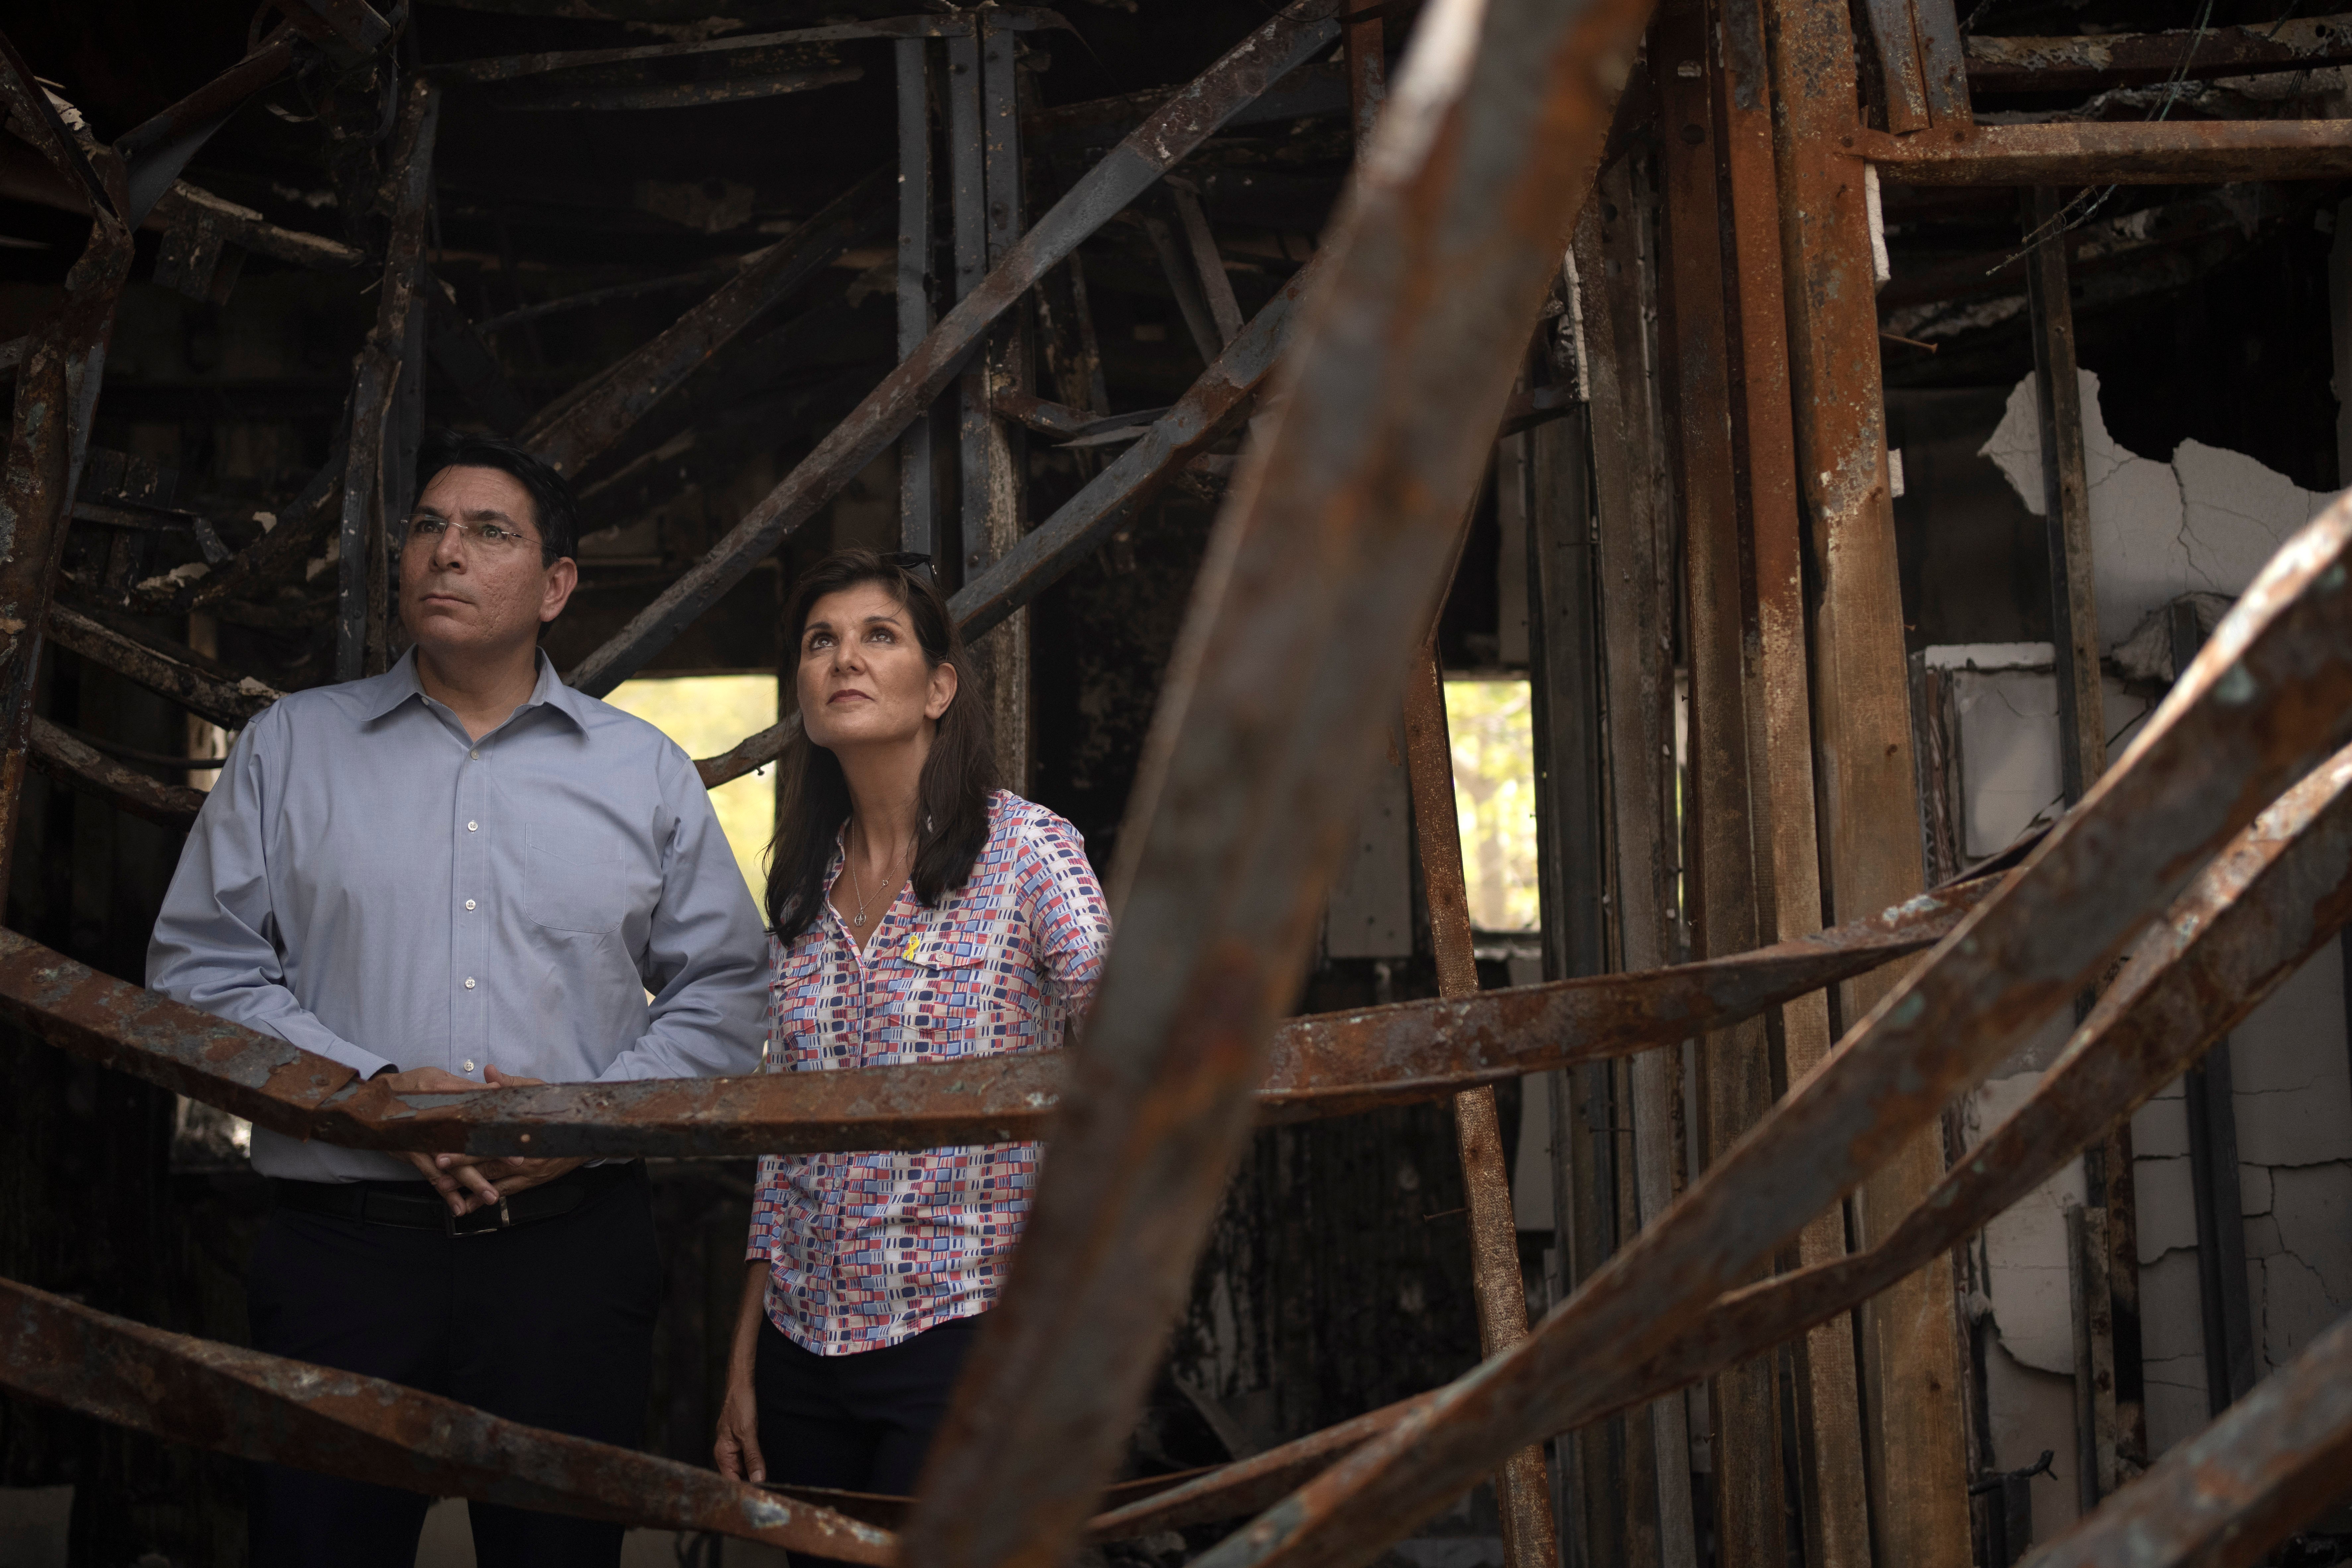 Danny Danon, a member of the Knesset, Israel's parliament, left, and Nikki Haley, former U.S. Ambassador to the United Nations, visit a home torched by Hamas in Kibbutz Nir Oz in southern Israel, Monday, May 27, 2024